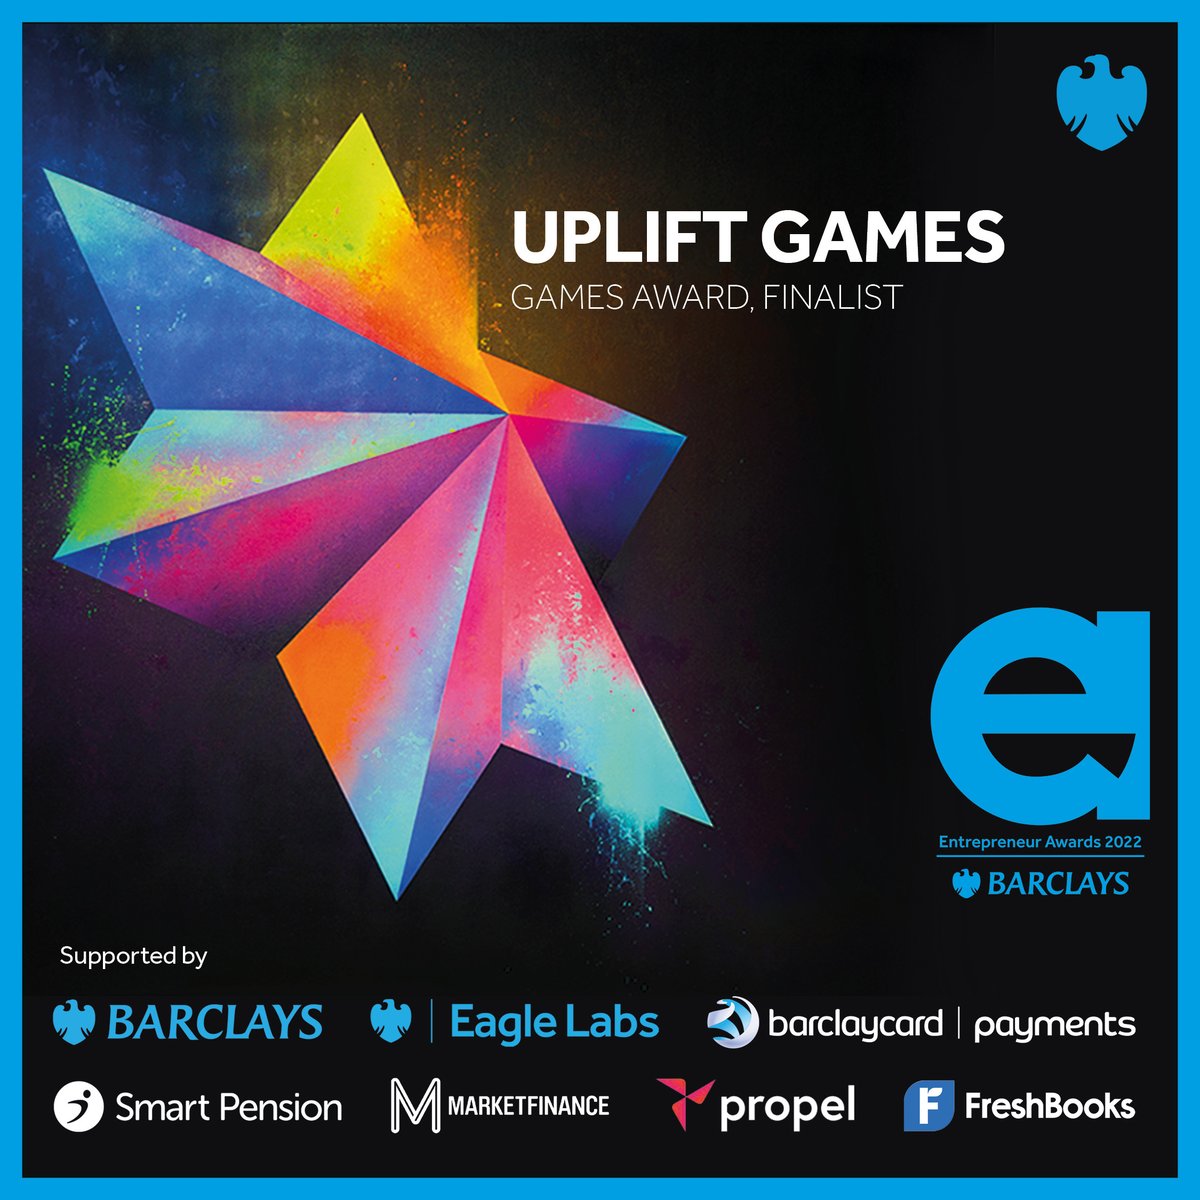 Barclays Entrepreneur Awards 2022 voting is open! Please vote for Uplift Games to win the People's Choice Award: events.barclays.com/esurvey/index.… All that is required is an email and to select Uplift from the list Voting is open until 00:00 30 Sept. Thanks so much for your support!